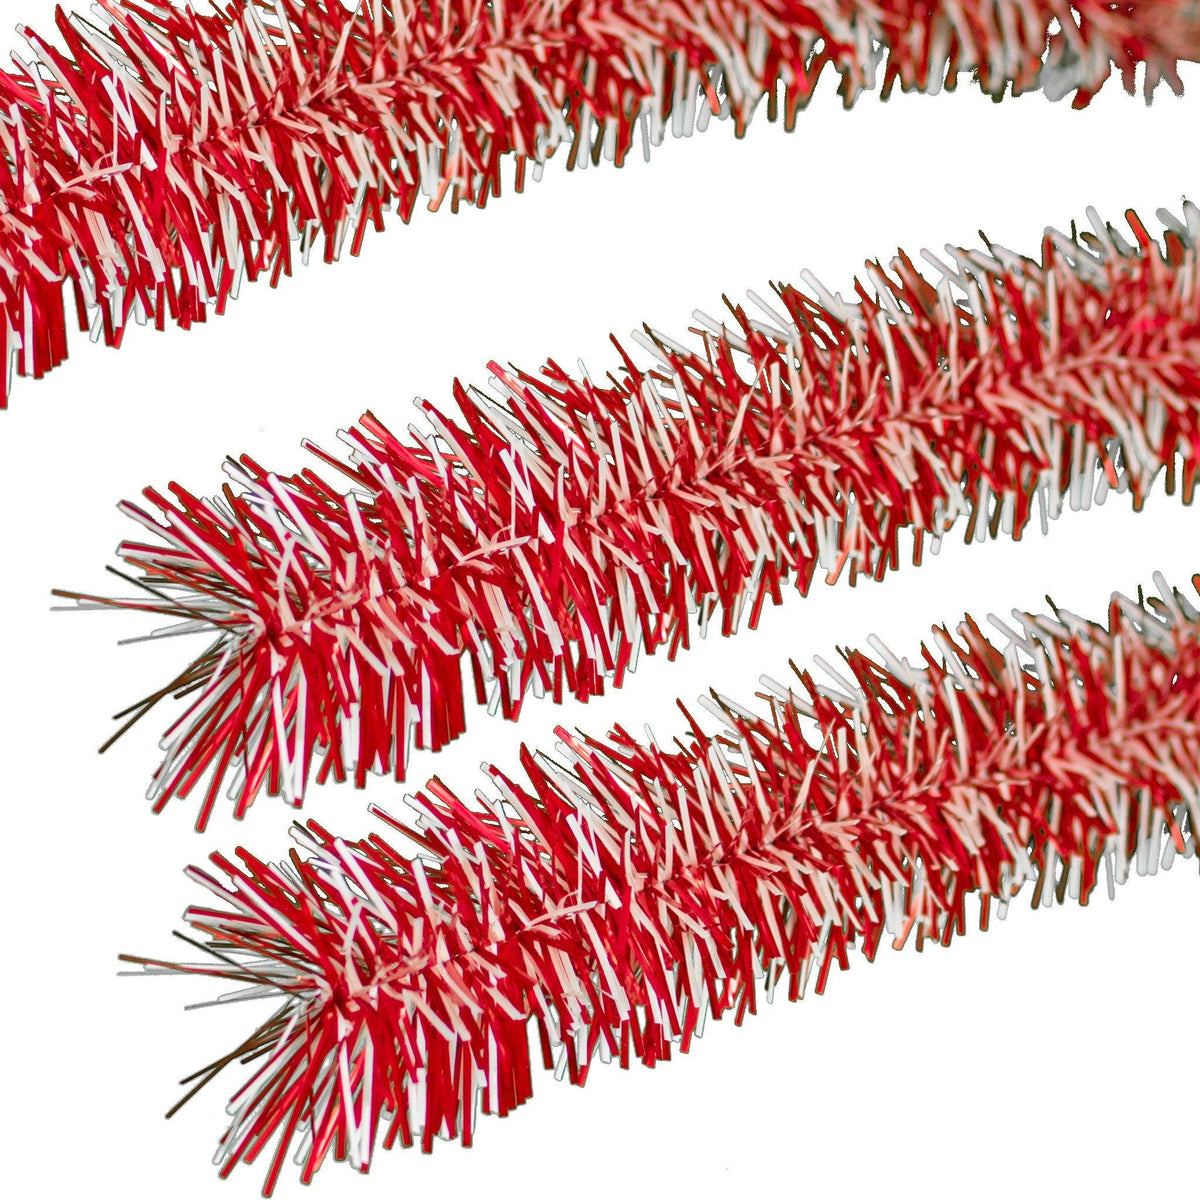 Lee Display's brand new 25ft Shiny Red and White Tinsel Garlands and Fringe Embellishments on sale at leedisplay.com